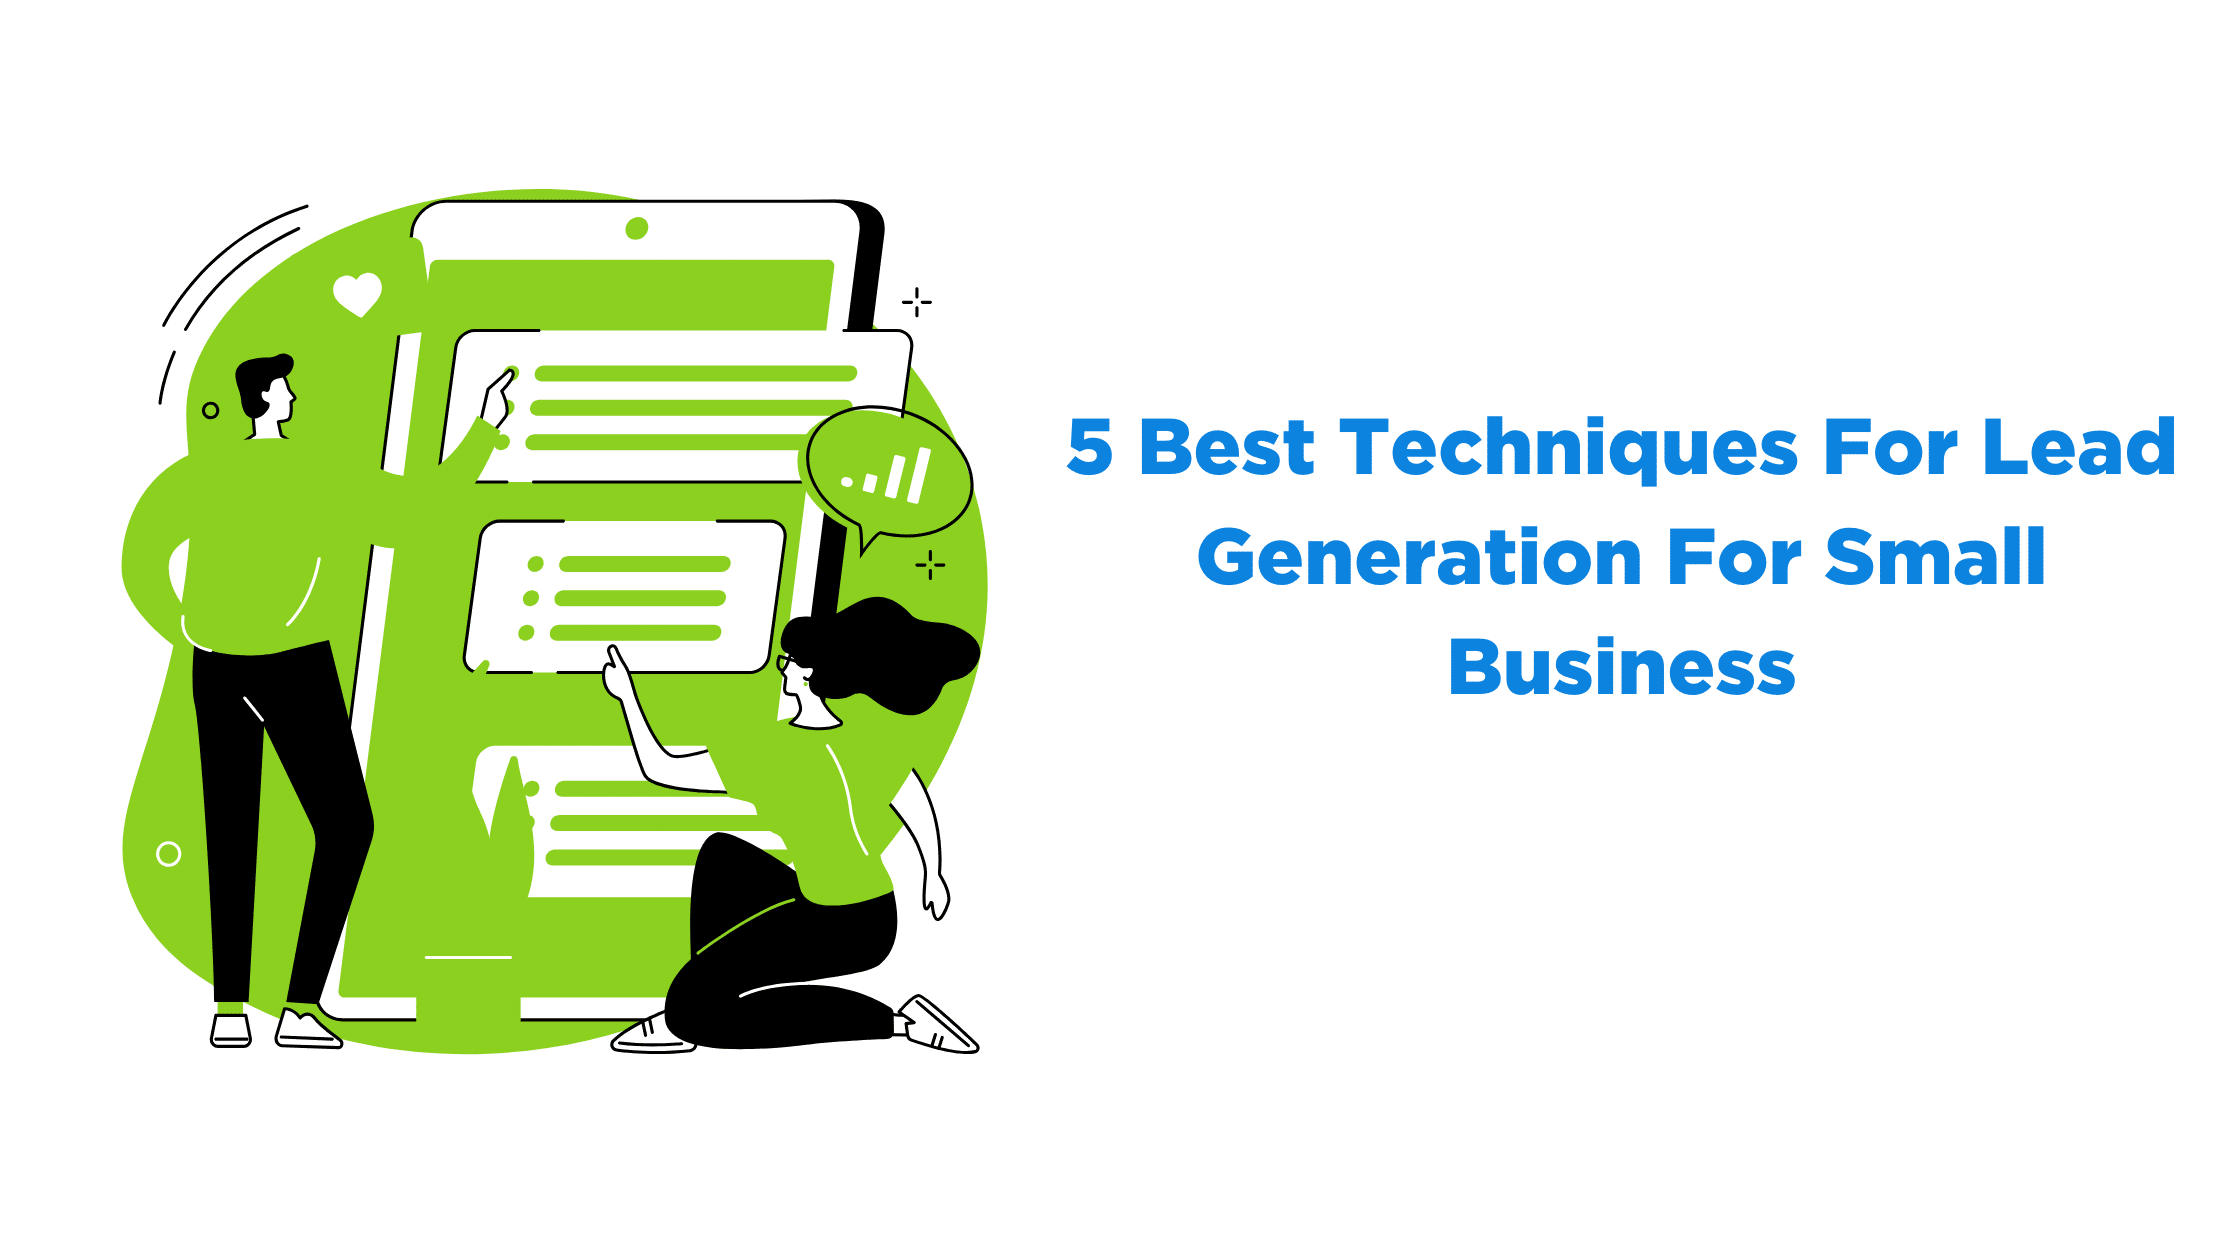 5 Best Techniques For Lead Generation For Small Business